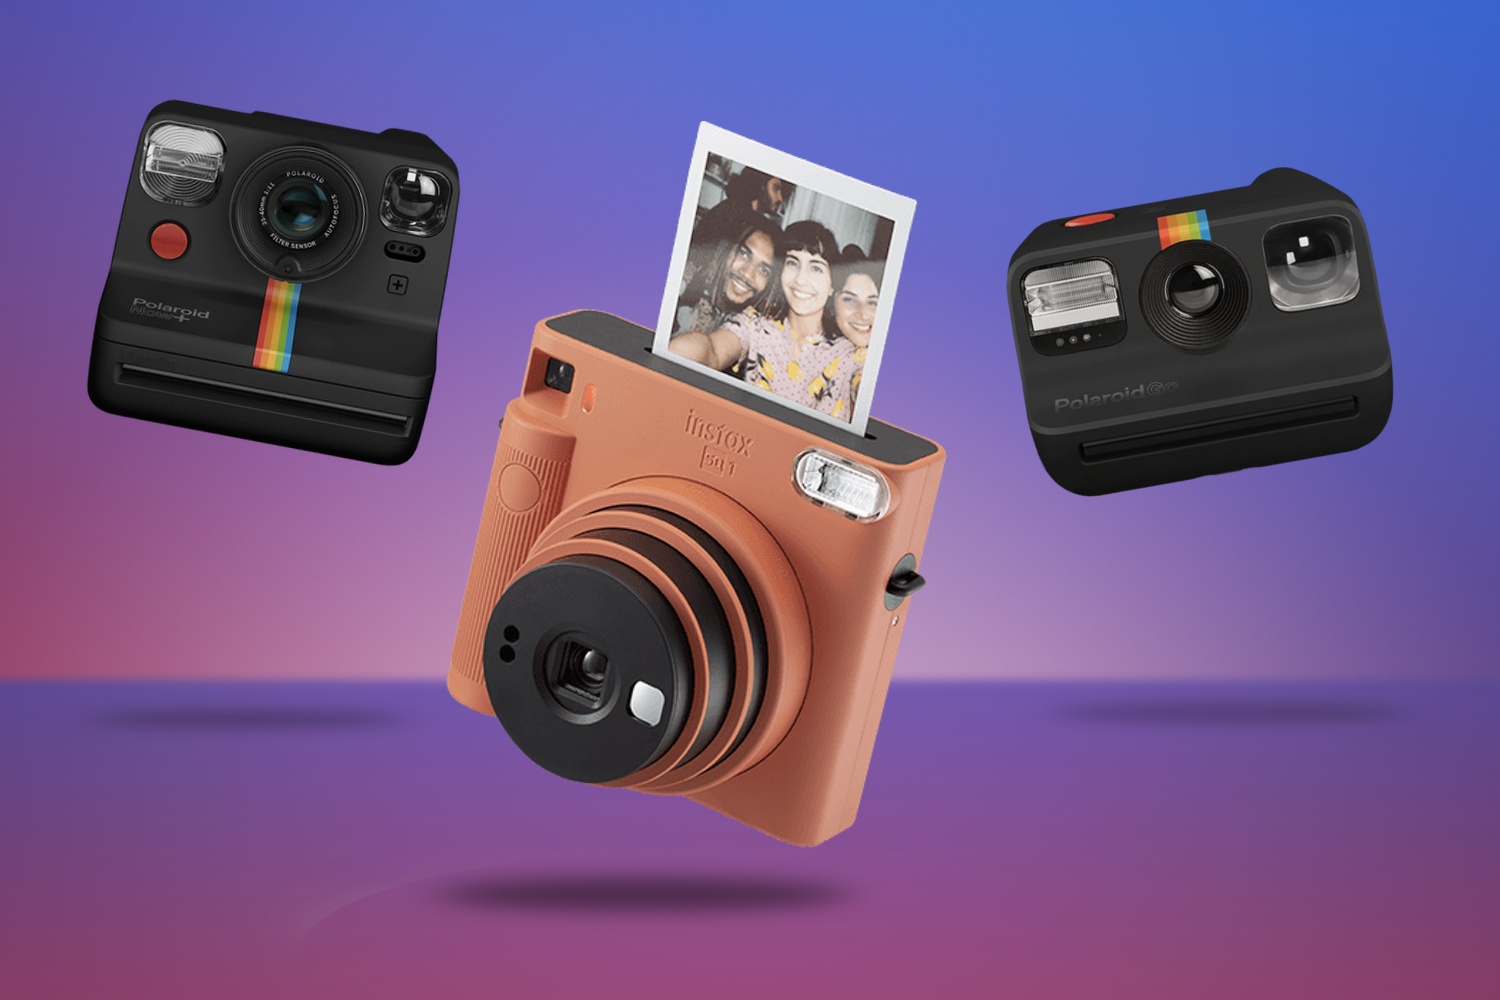 https://www.stuff.tv/wp-content/uploads/sites/2/2022/02/Best-Instant-Cameras-Print-Photography.png